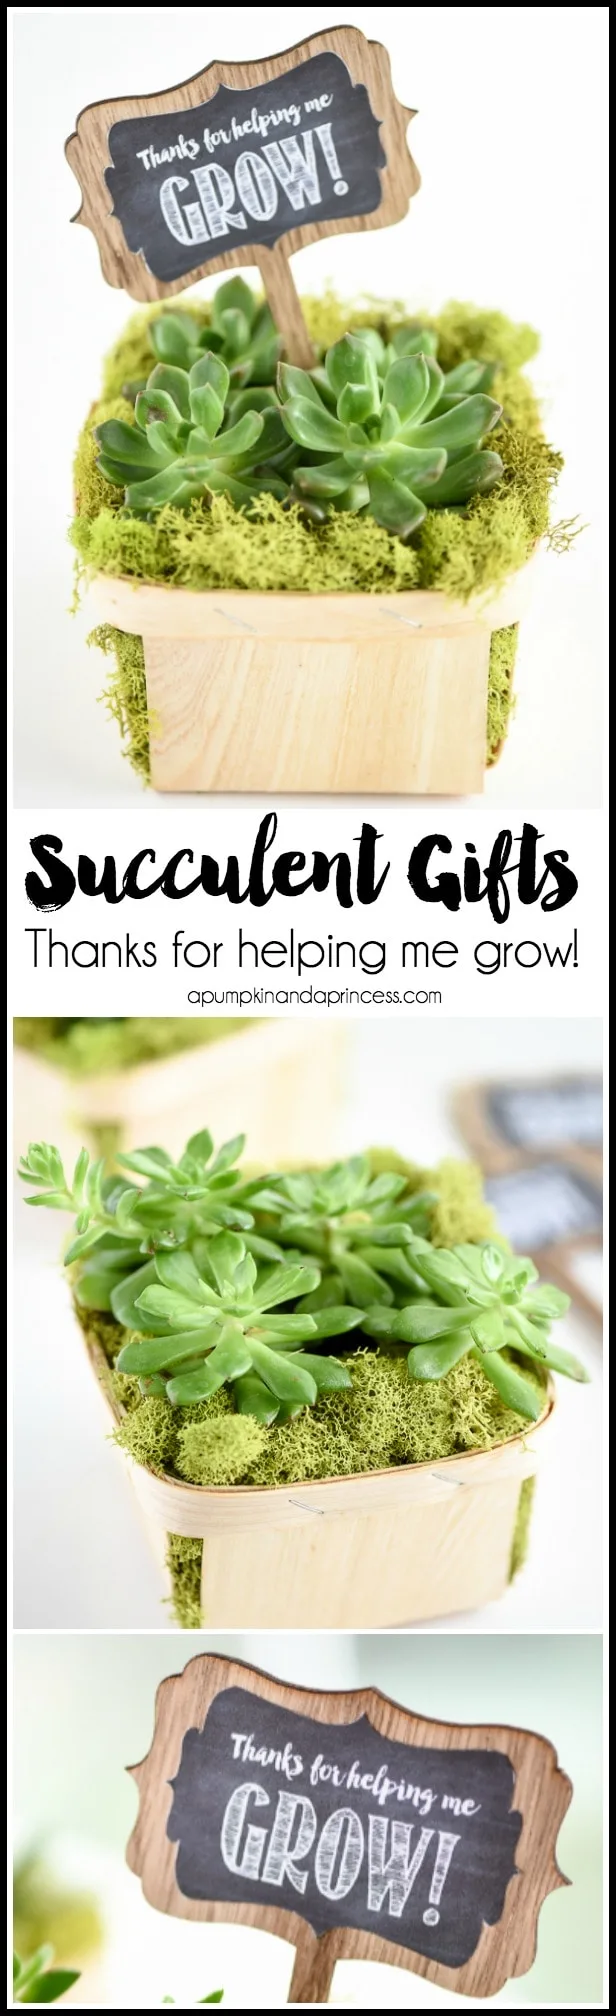 Succulent "thanks for helping me grow". Gift idea for Teacher Appreciation Week. This site has some great teacher gift ideas.